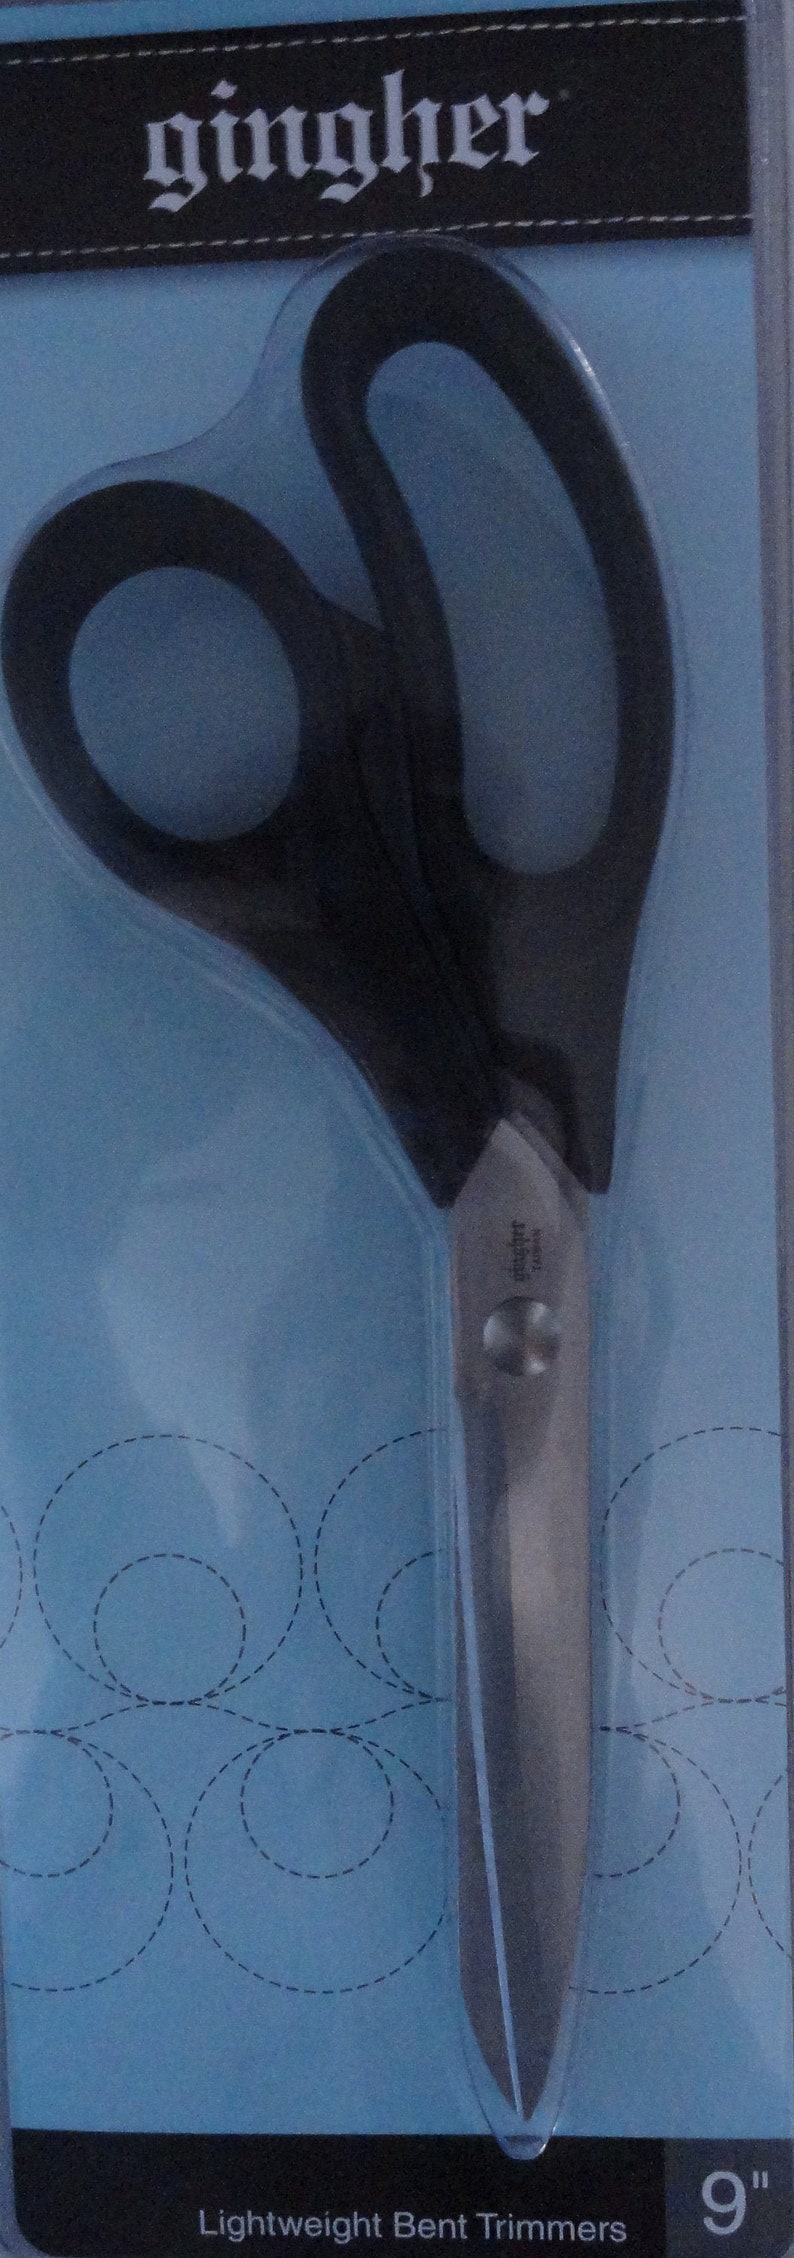 Gingher Lightweight 9 Bent Trimmers or 4 Embroidery Scissors, Lightweight Gingher Scissors, 9Trimmers, 4Embroidery, Lightweight Scissors image 1